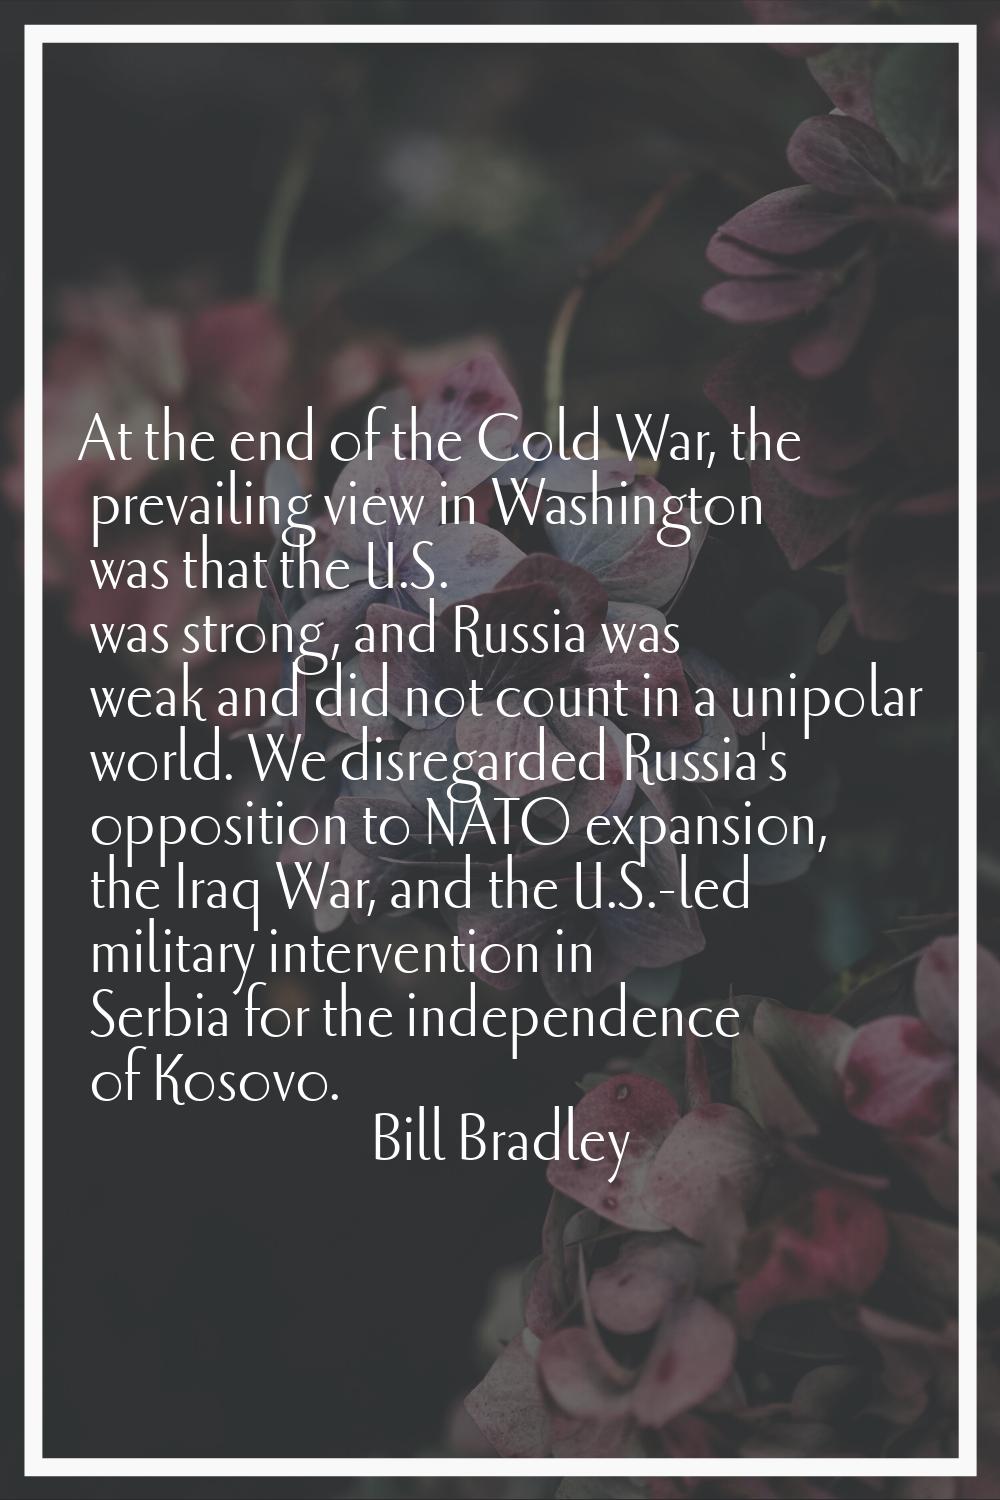 At the end of the Cold War, the prevailing view in Washington was that the U.S. was strong, and Rus